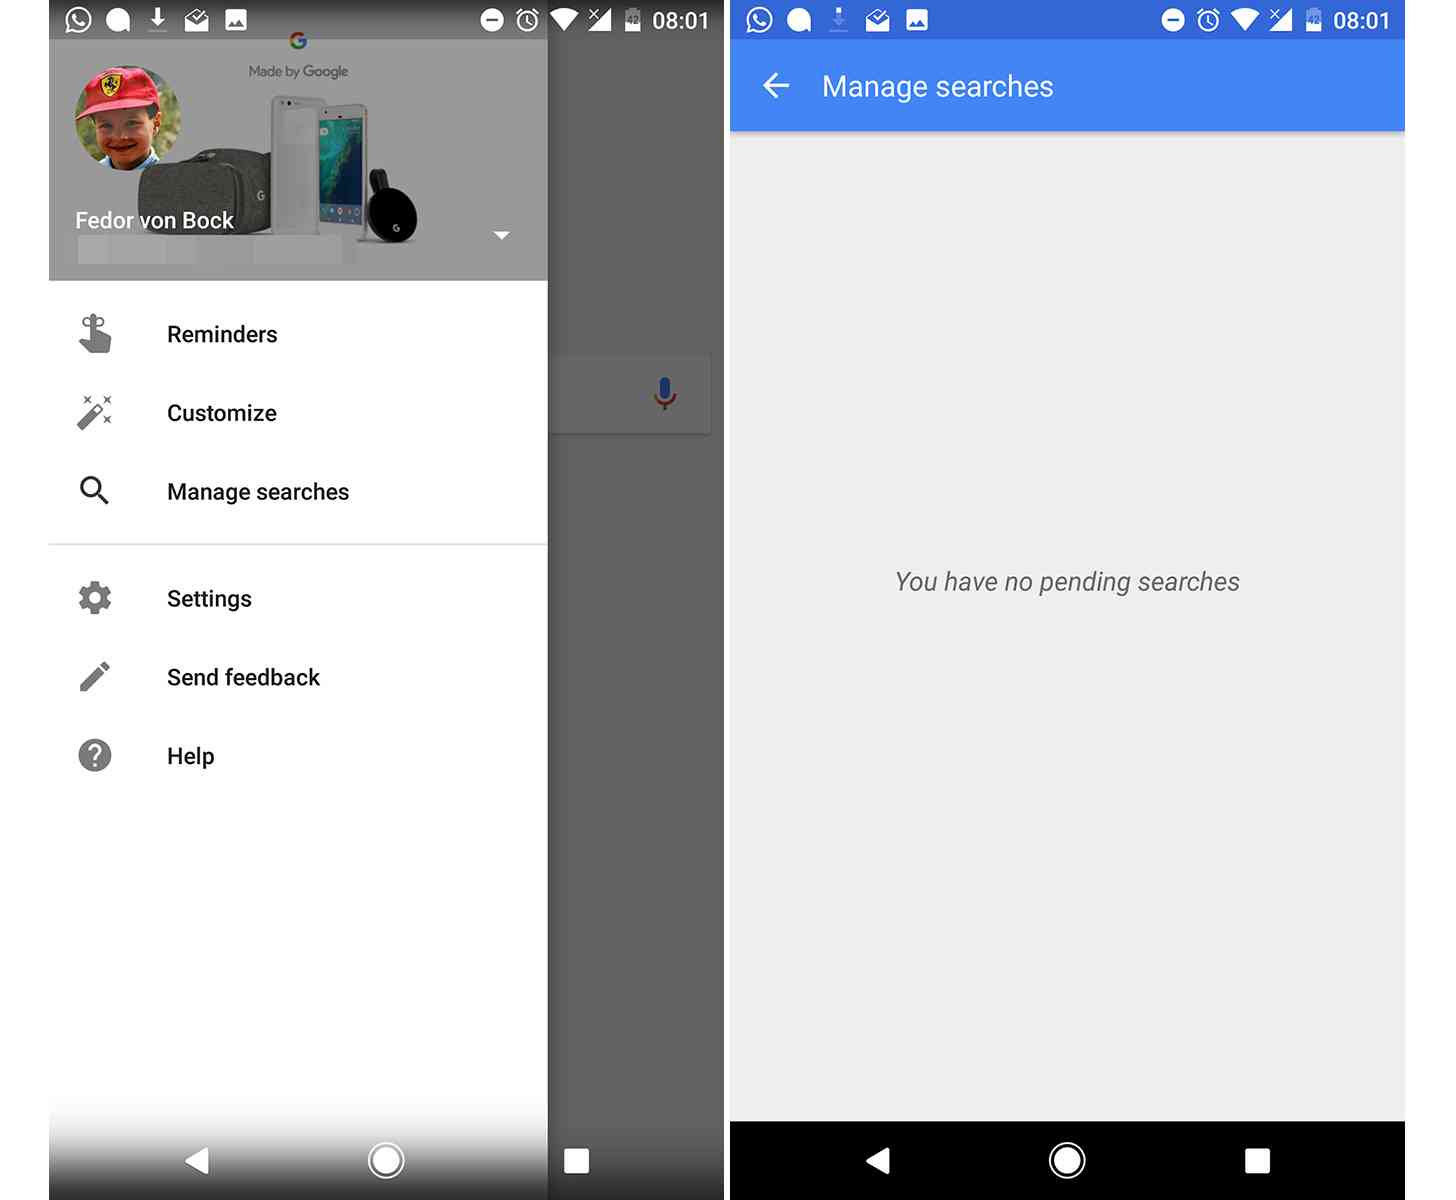 Google Search Android Offline Mode testing